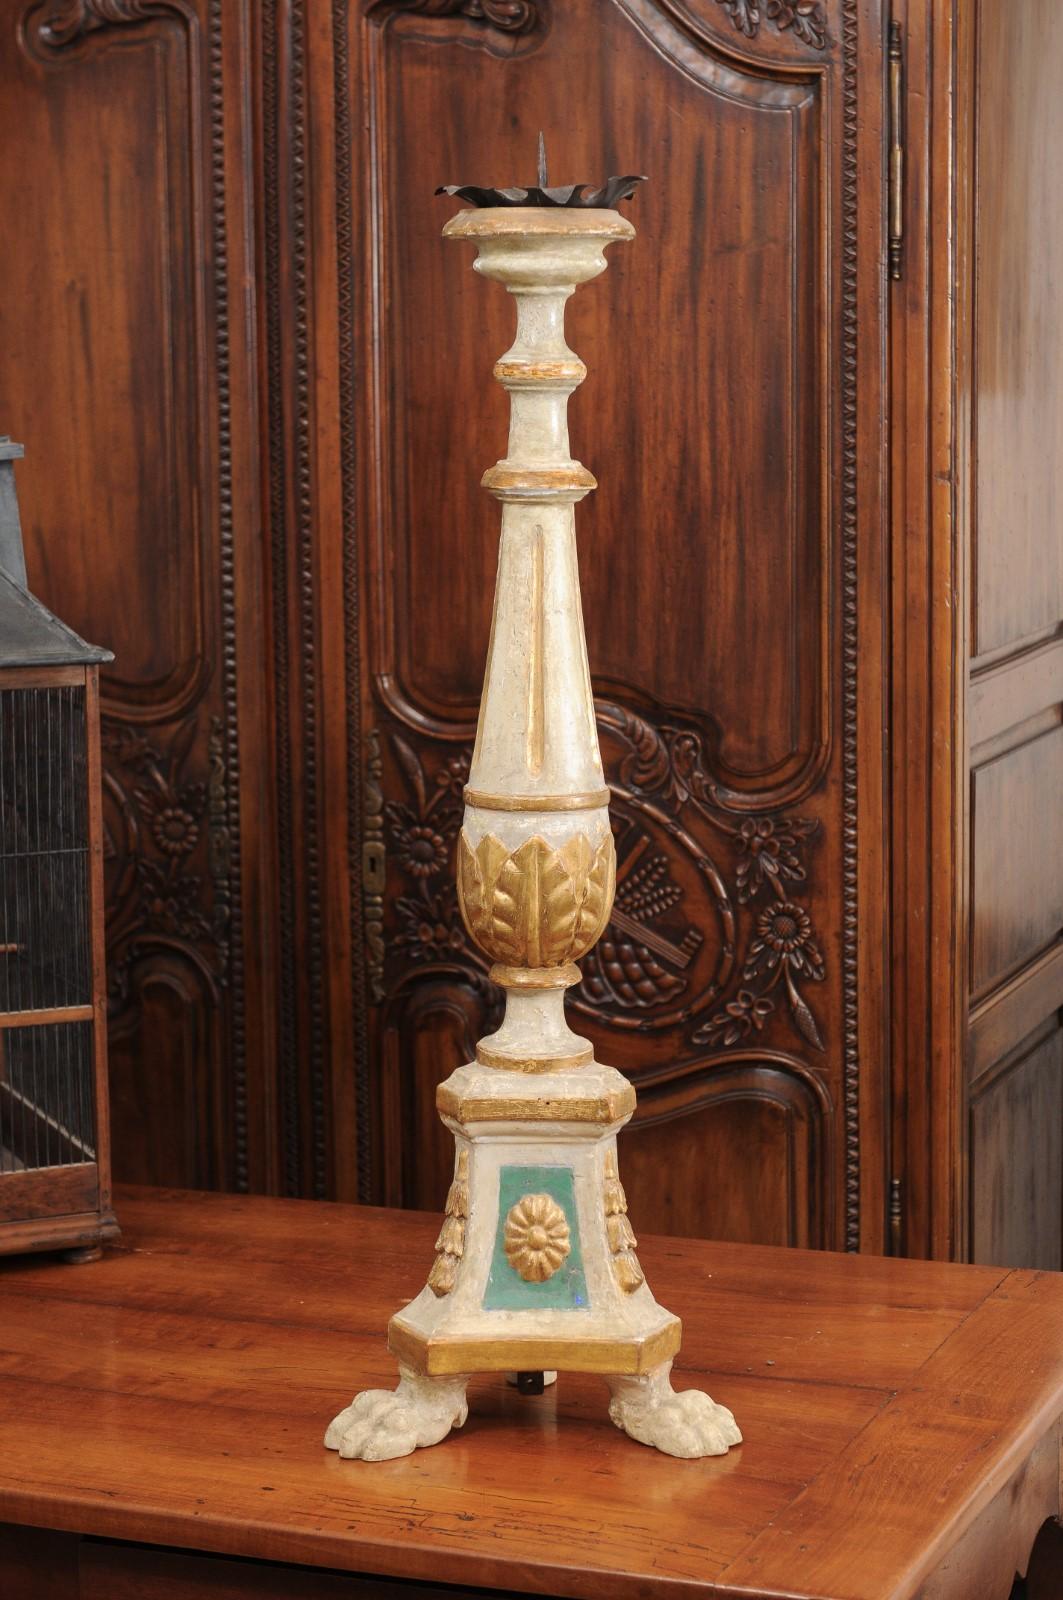 An 18th century painted and gilded candlestick from Tuscany, with fluted motifs and acanthus leaves. Created in central Italy during the 18th century, this Tuscan candlestick features a painted fluted column accented with gilt acanthus leaves,